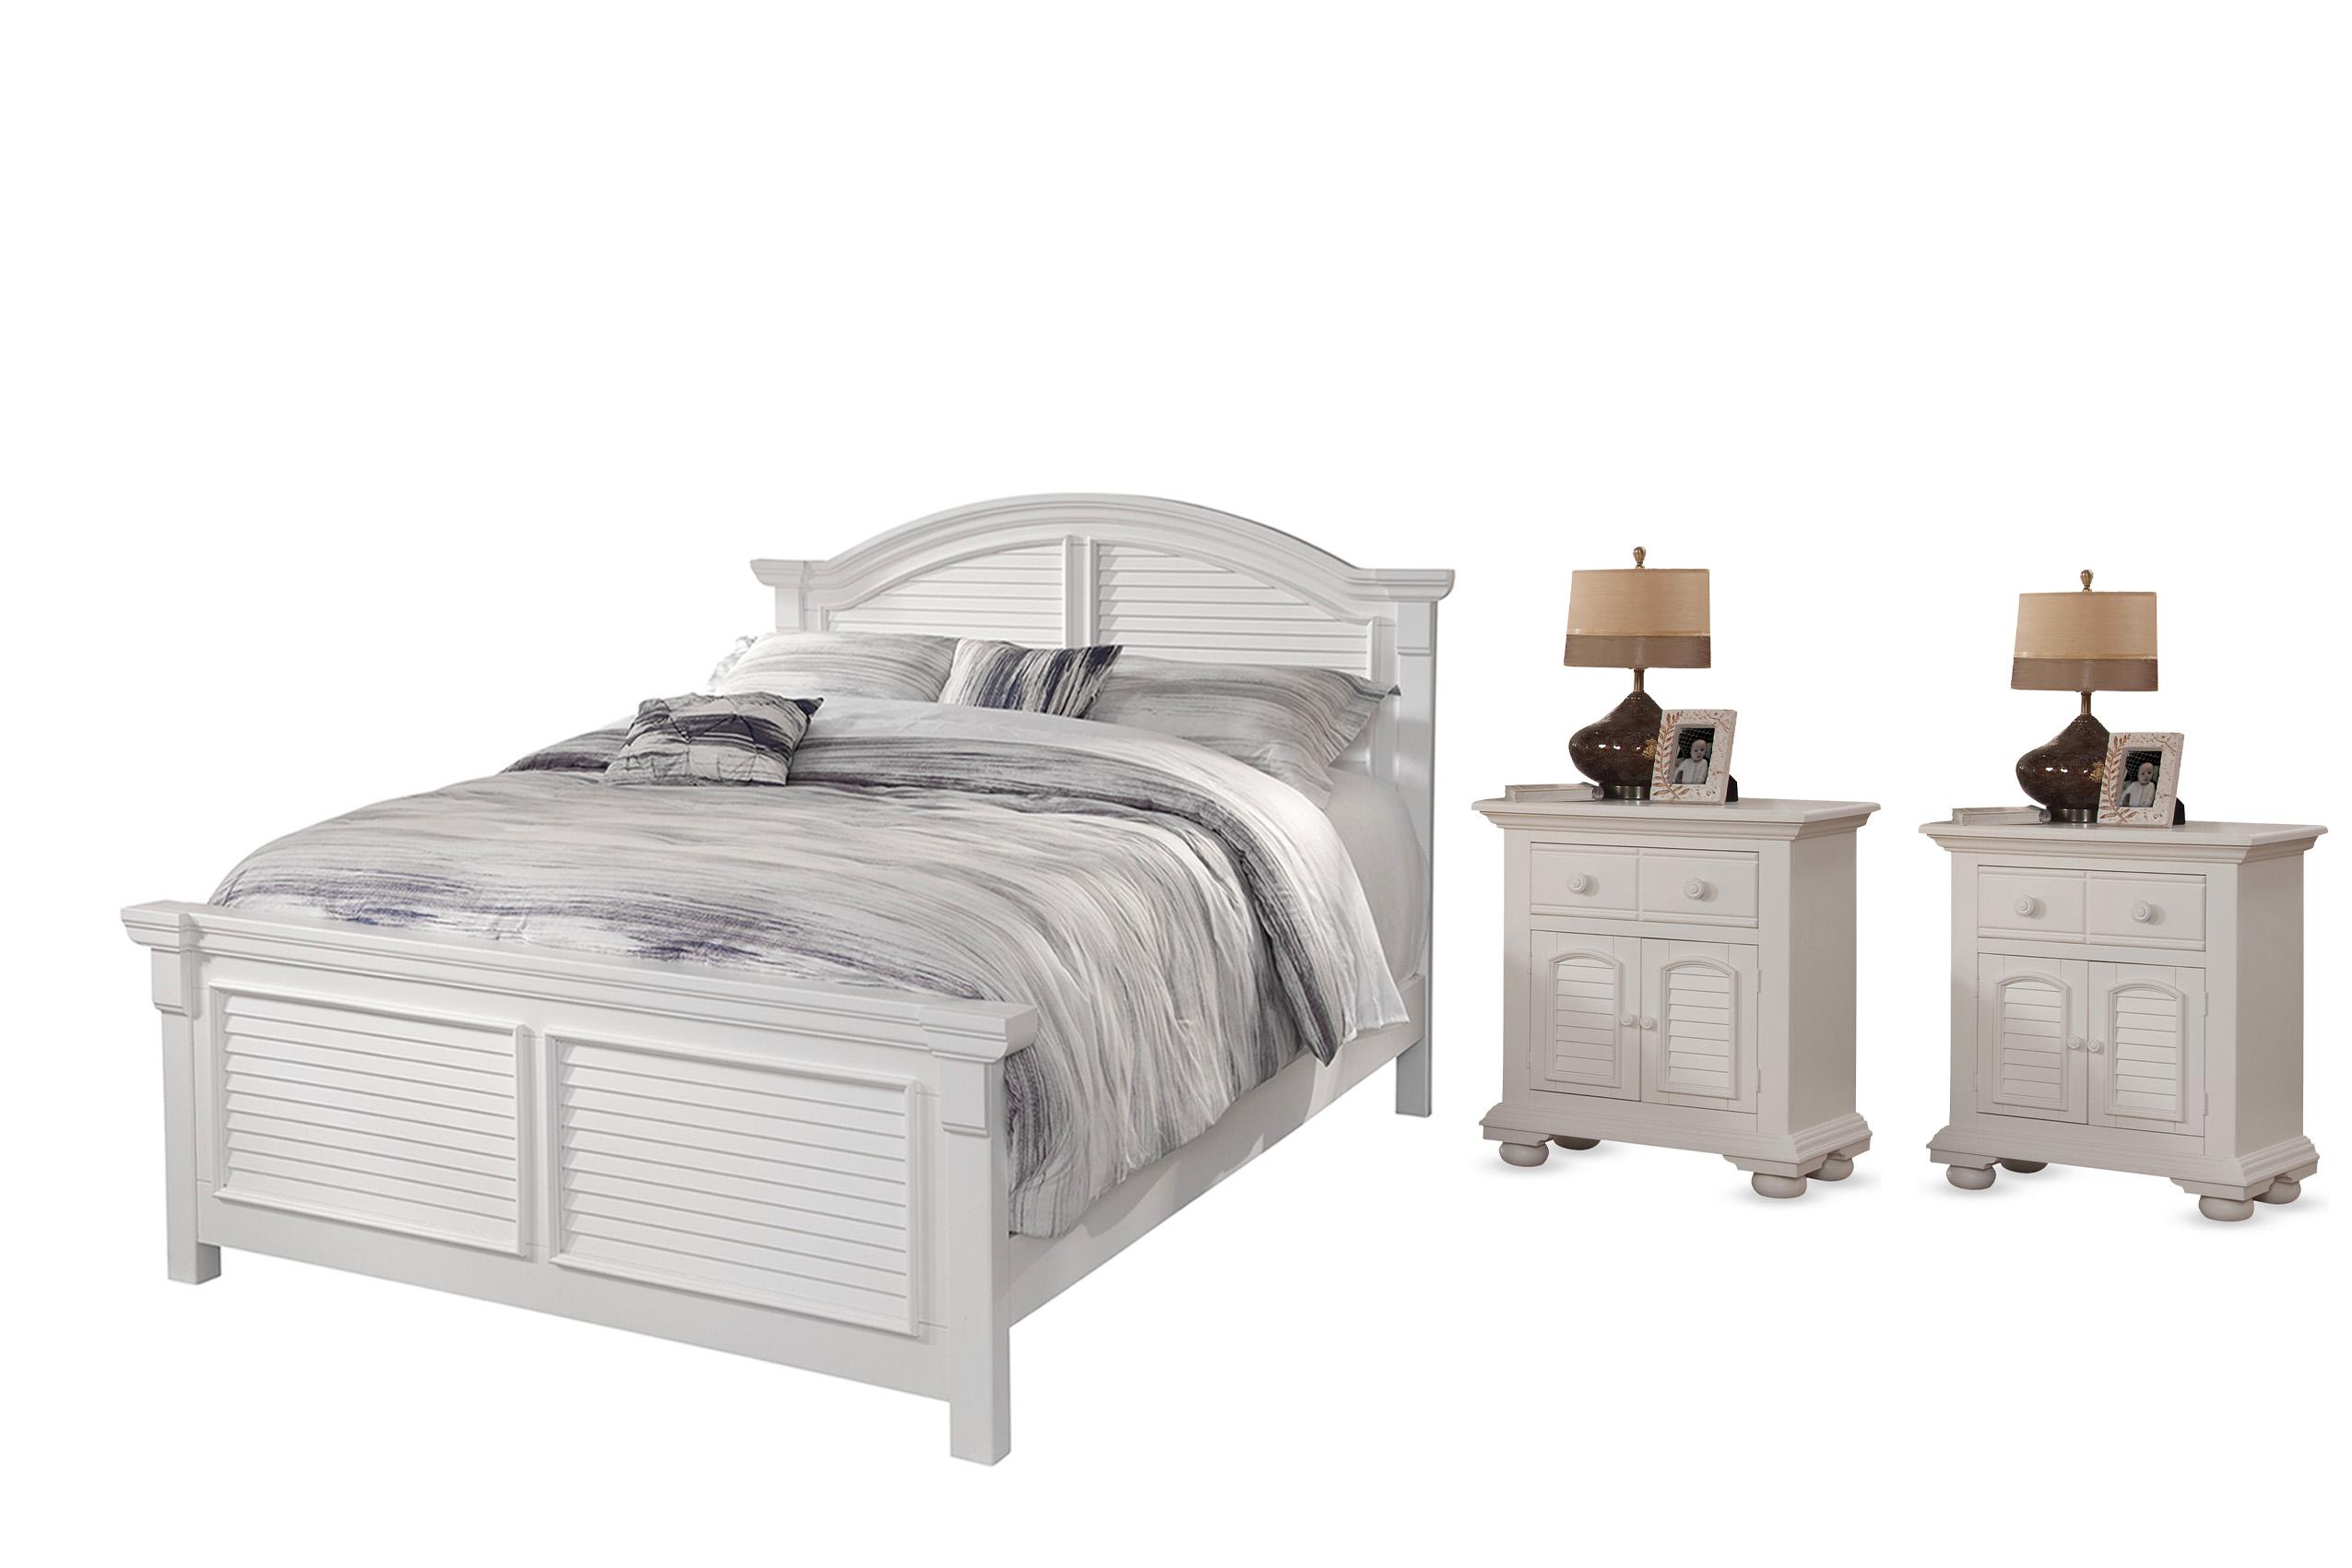 Classic, Traditional, Cottage Panel Bedroom Set COTTAGE 6510-66PAN 6510-66PAN 6510-412-2N-3PC in White 